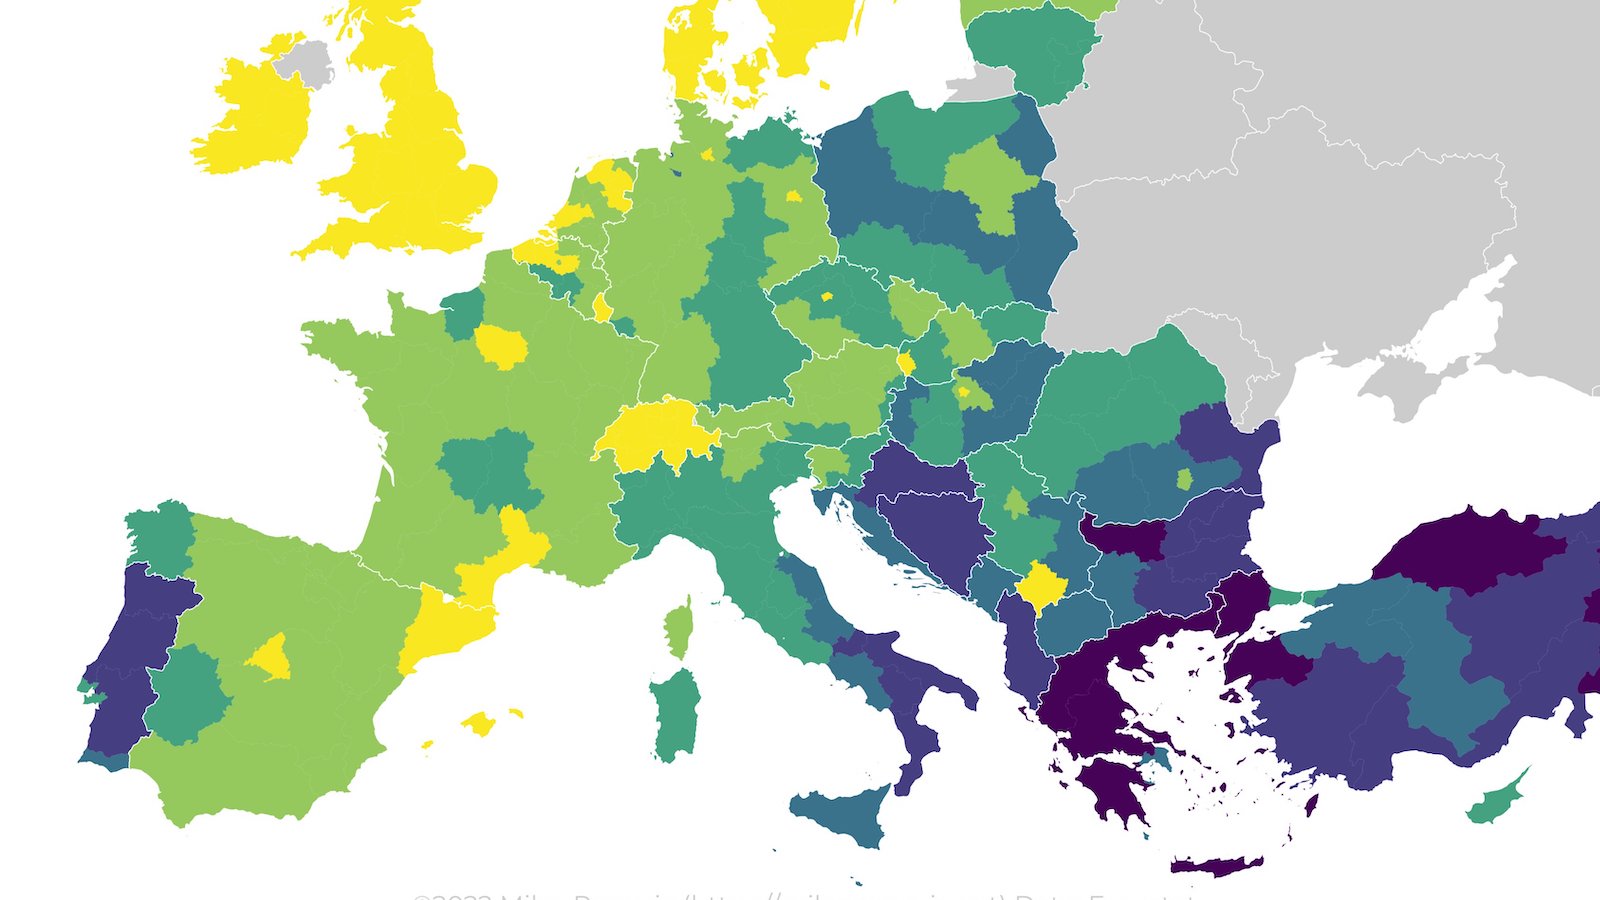 Europe's stunning digital divide, in one map